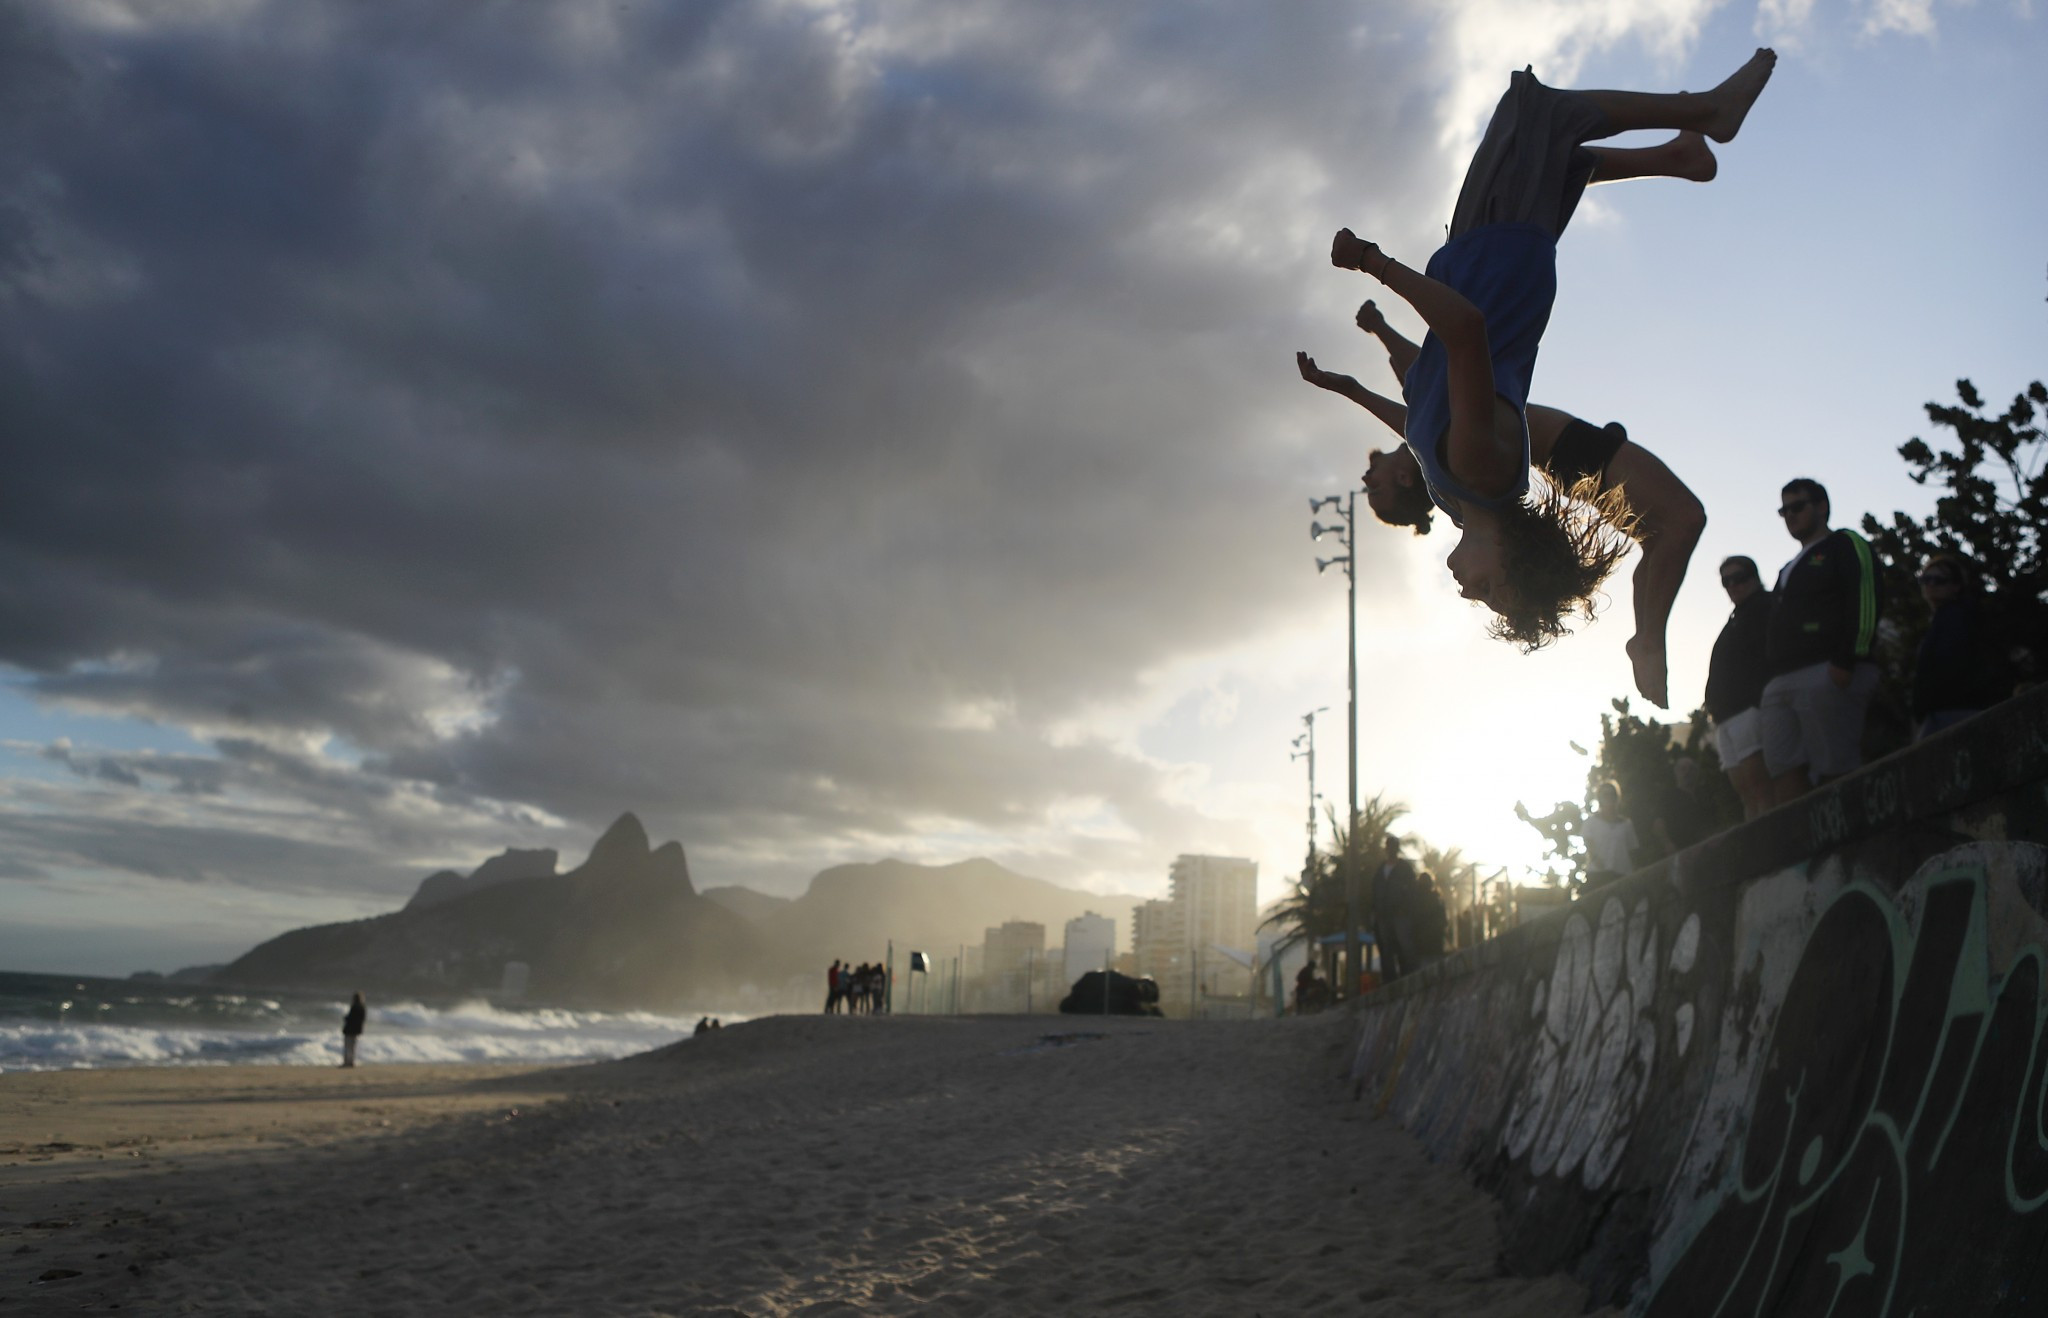 FIG's move into parkour has been opposed by several groups ©Getty Images